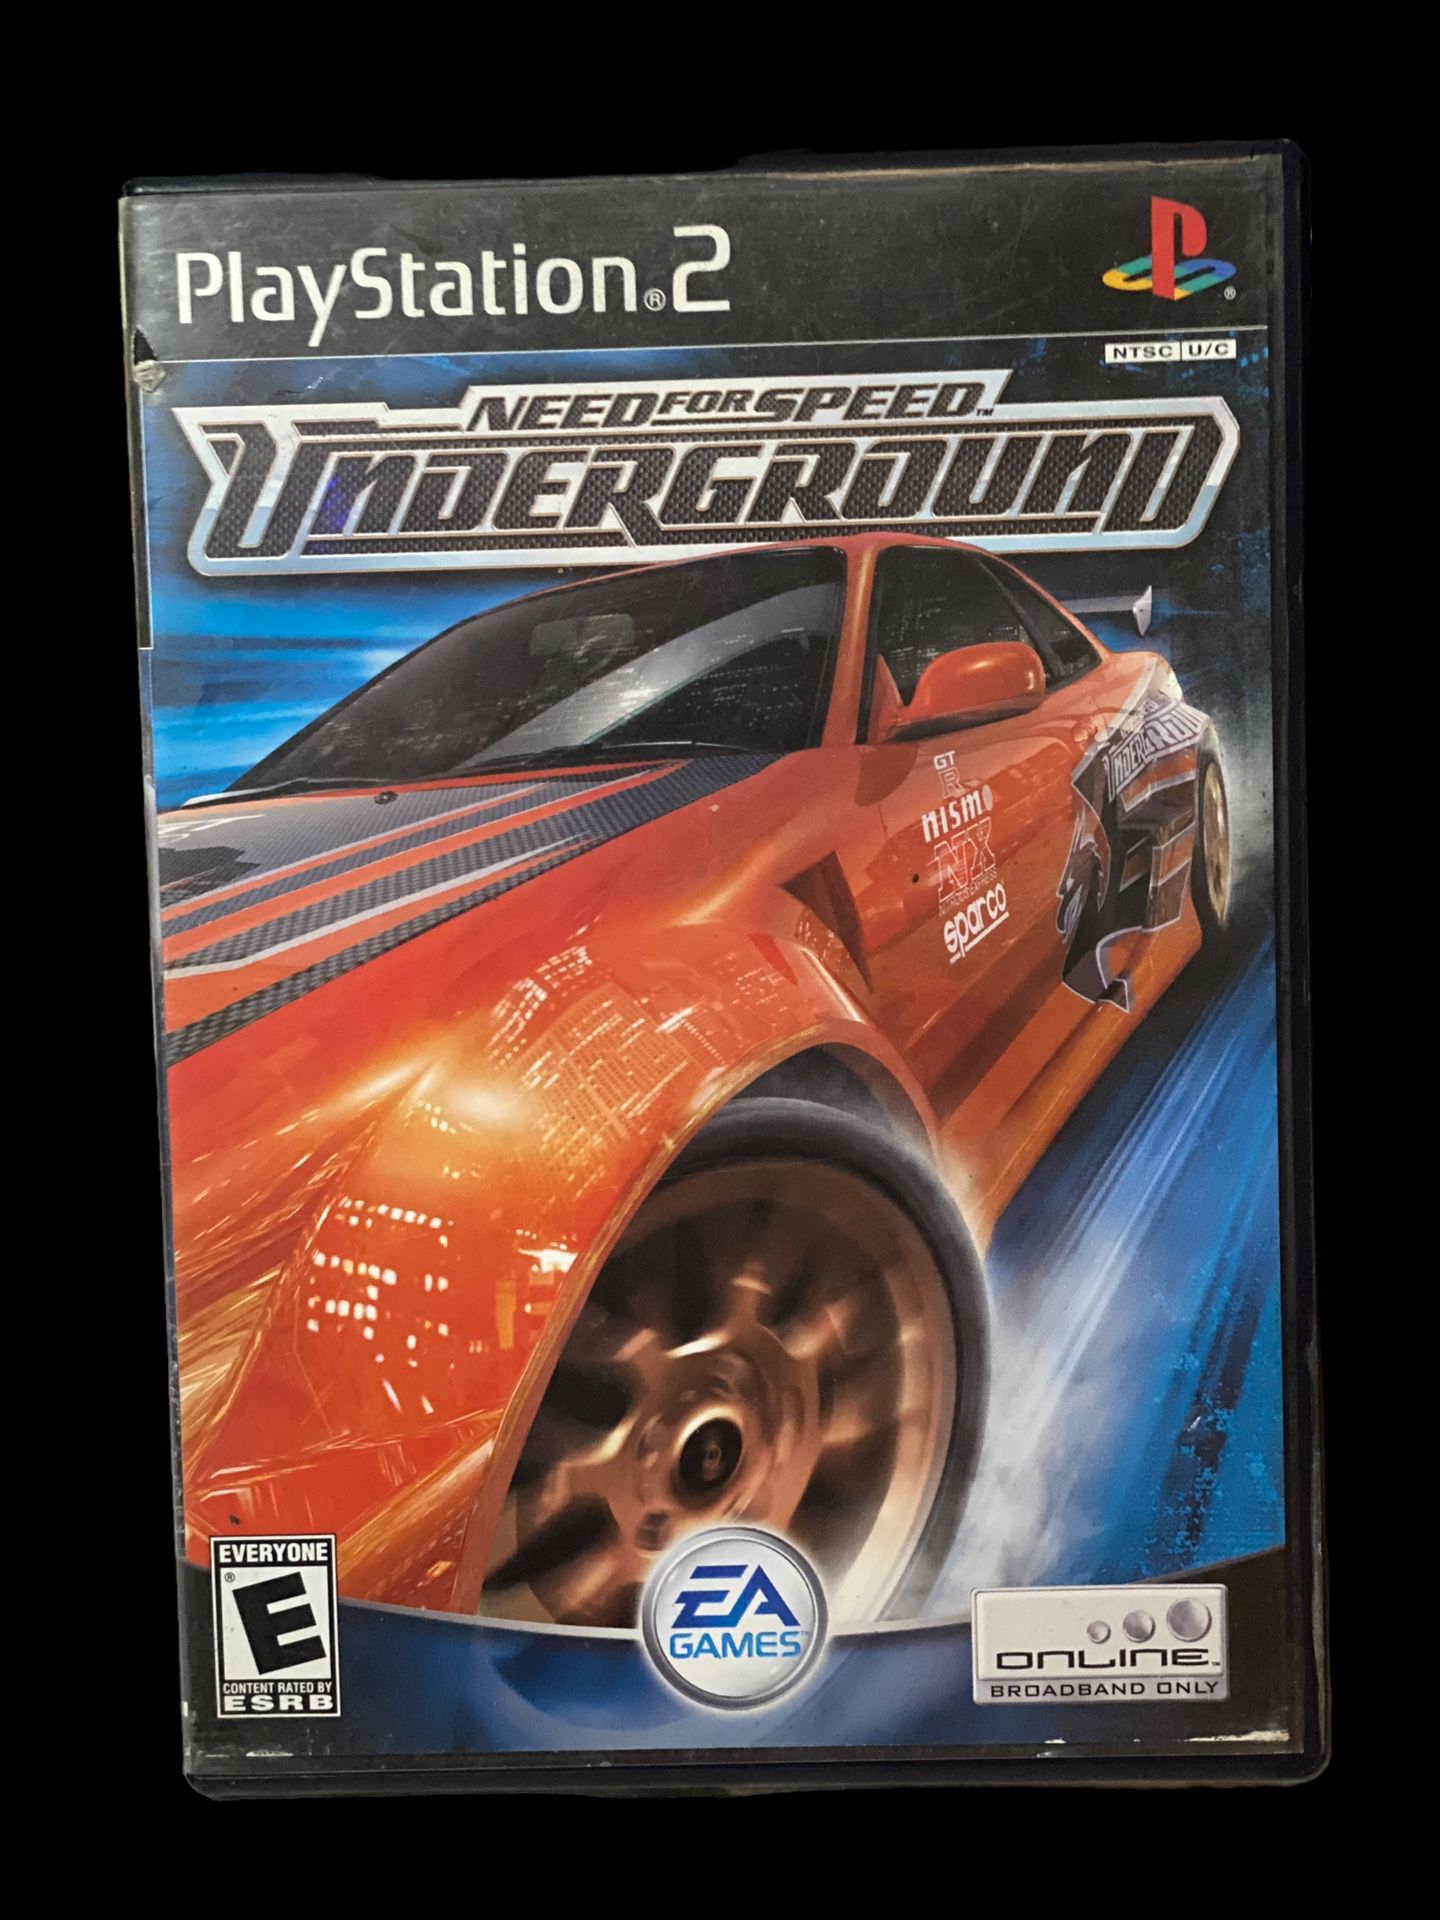 Need For Speed Underground Sony PlayStation 2 PS2       2003